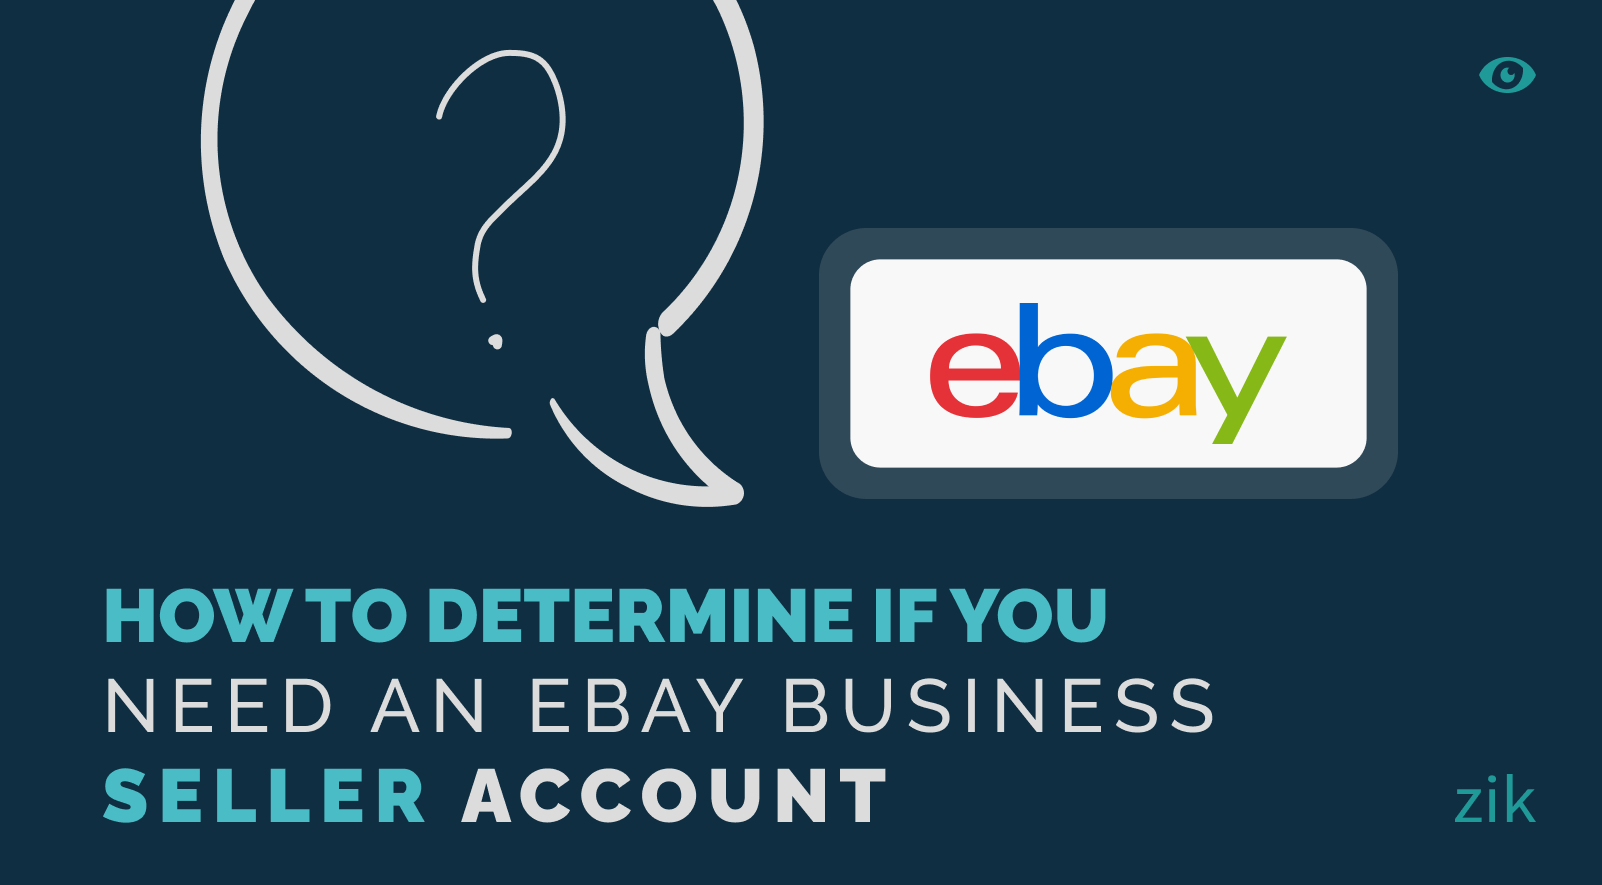 When to use business seller account